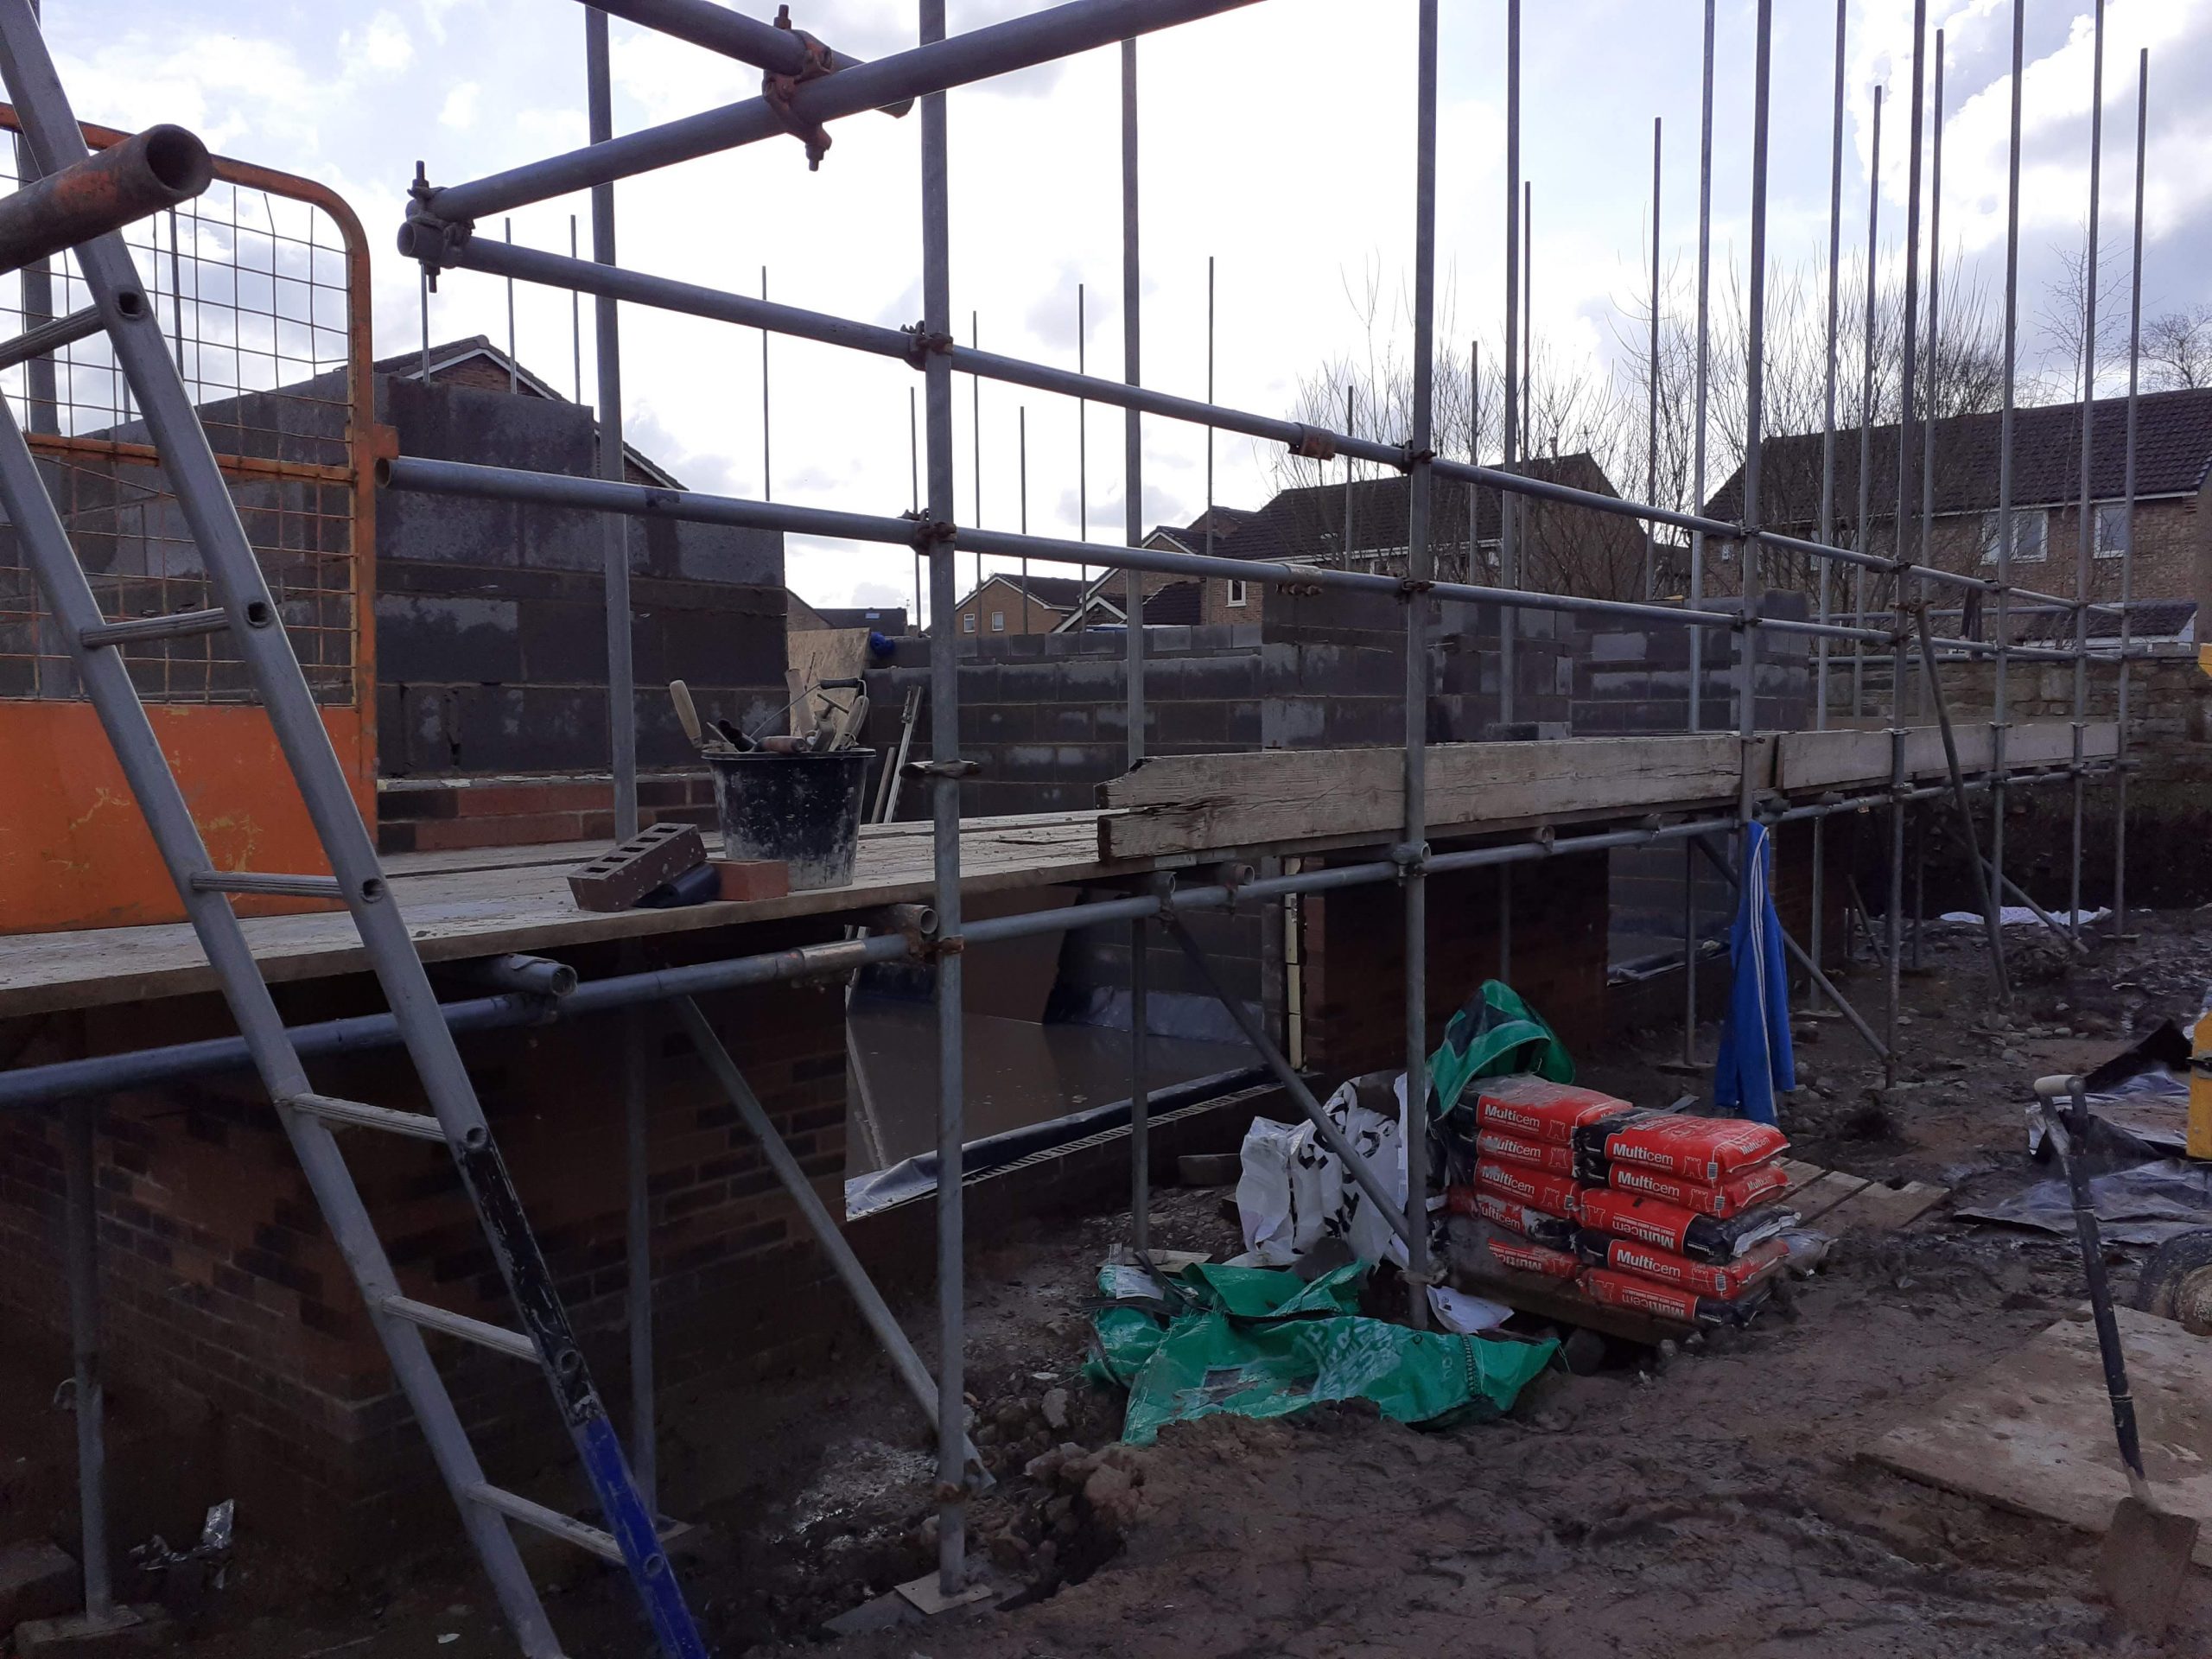 March 4th 2020, Scaffolding Erected